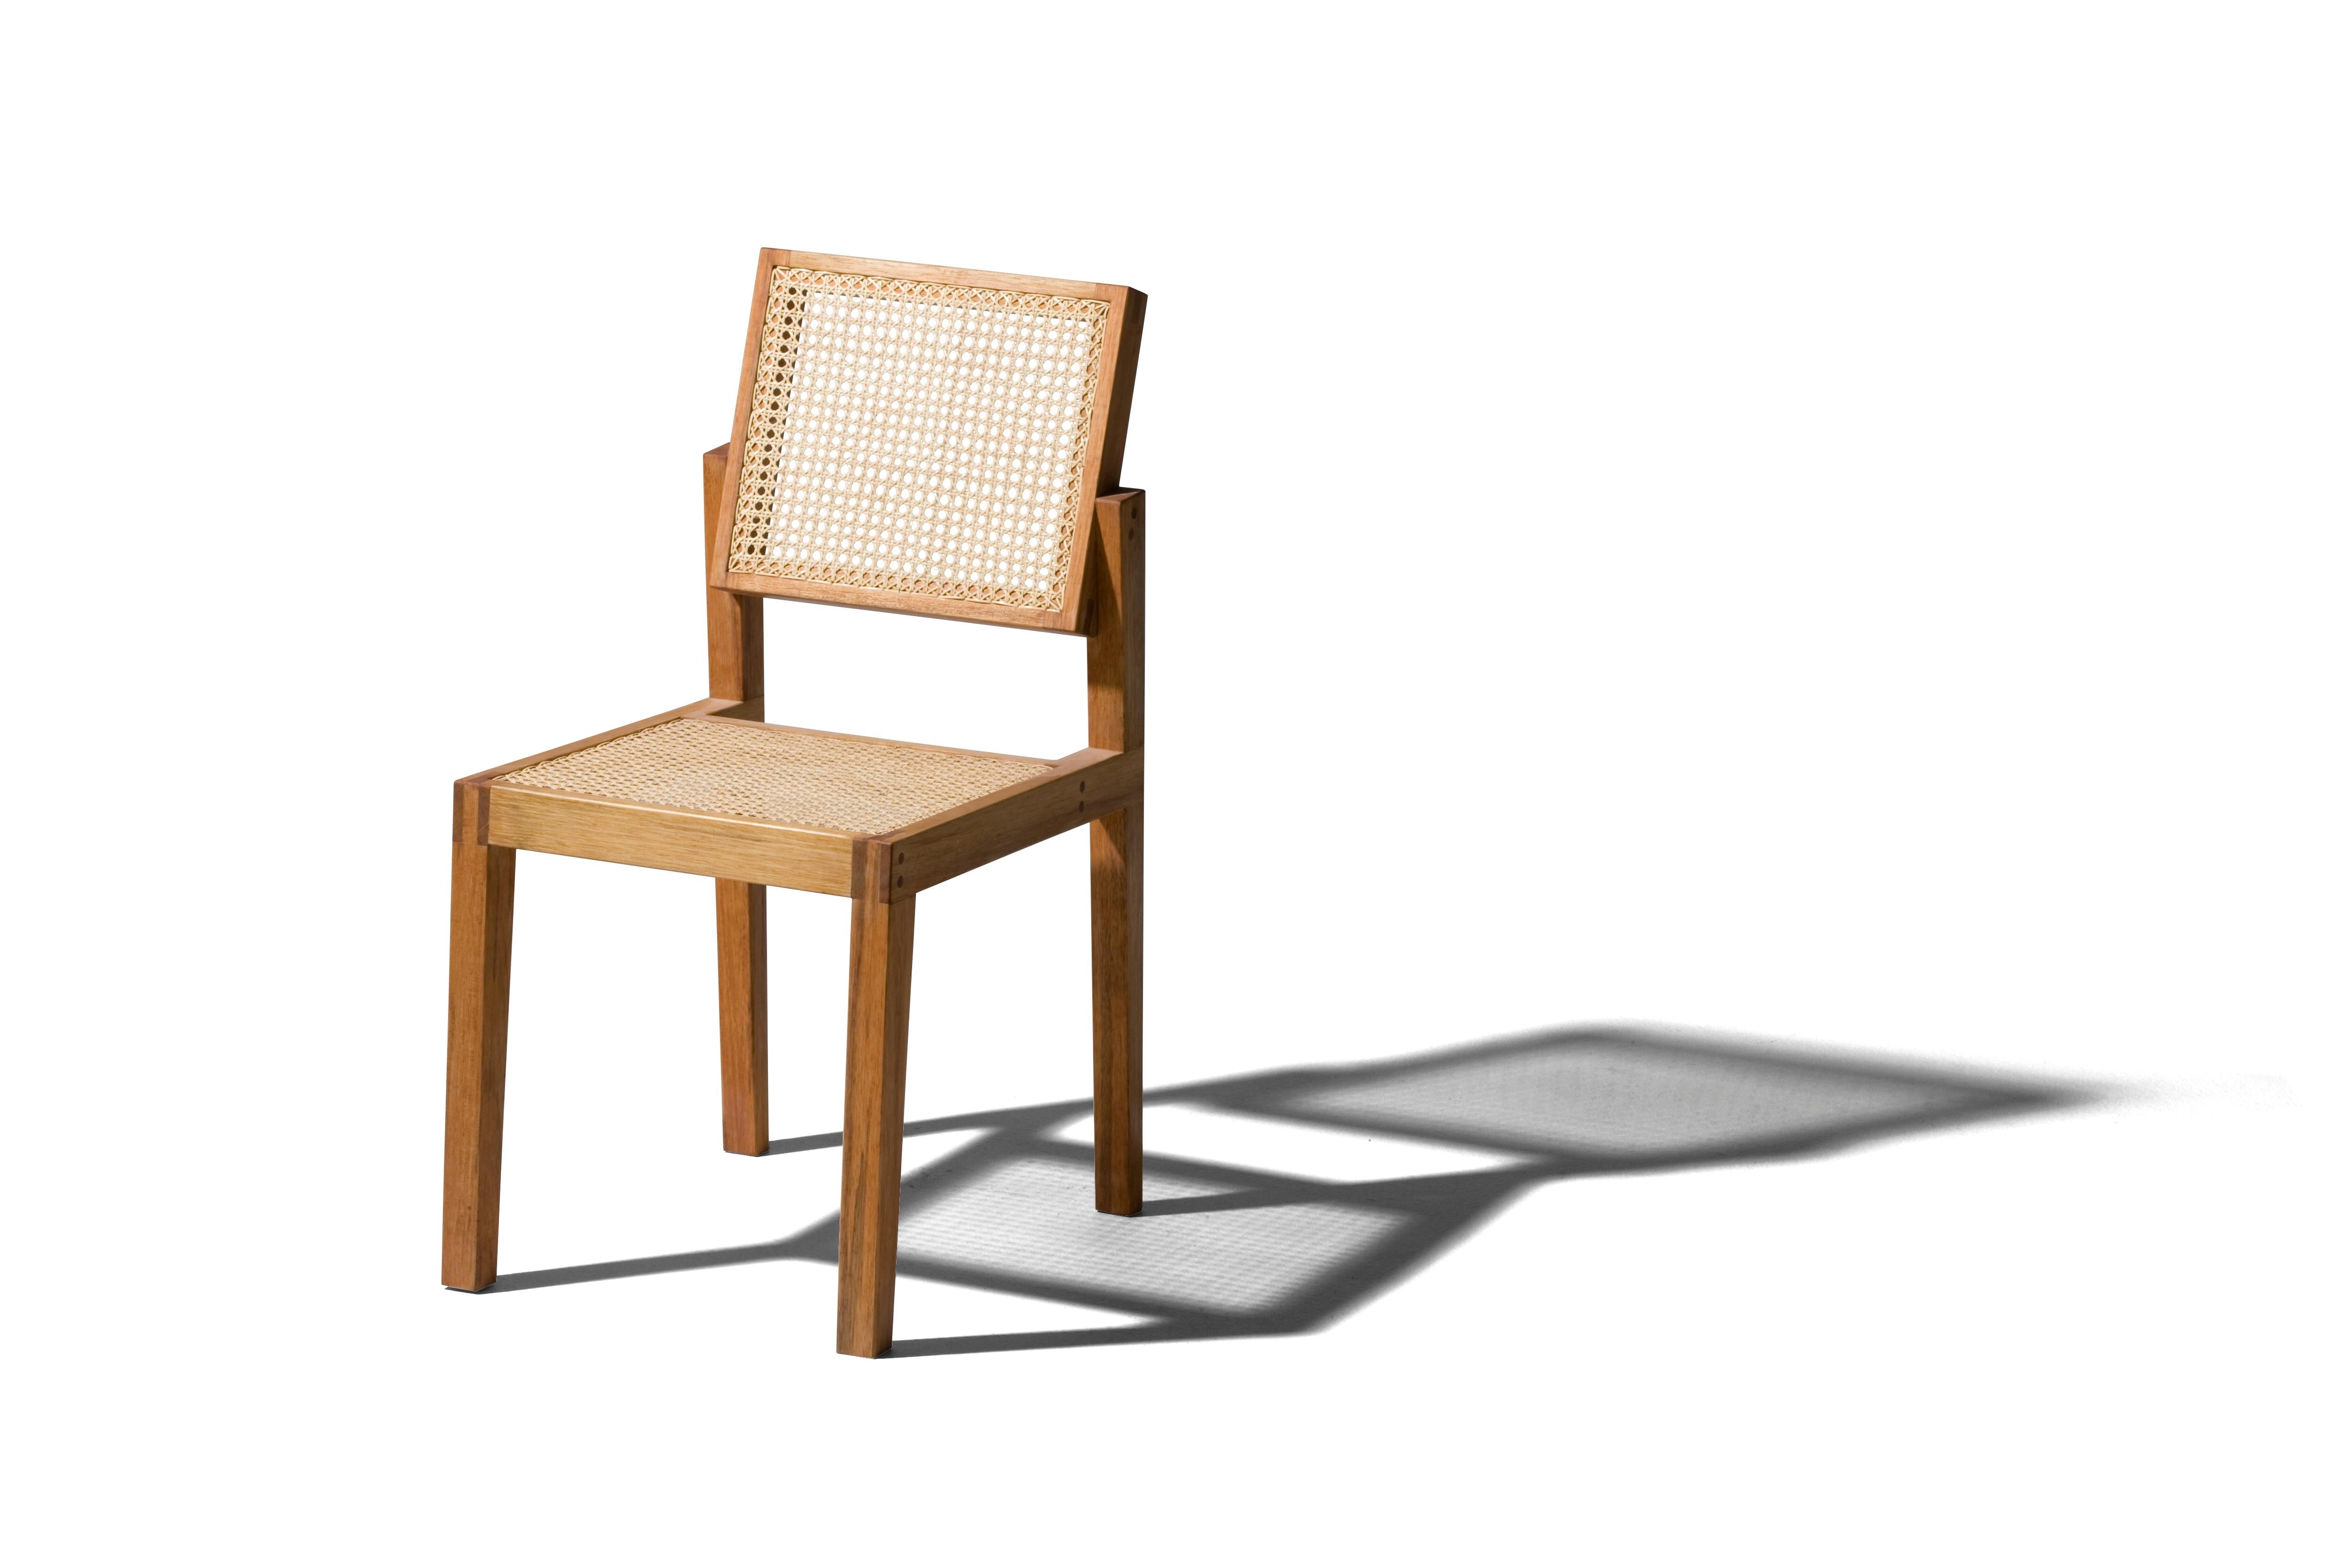 This is a sturdy and welcoming chair (in time, Parruda means “stout”). There is lightness from the compact structure and from the straw seat and back. You will be hard-pressed to find a chair with so many joints and manual labour put in.